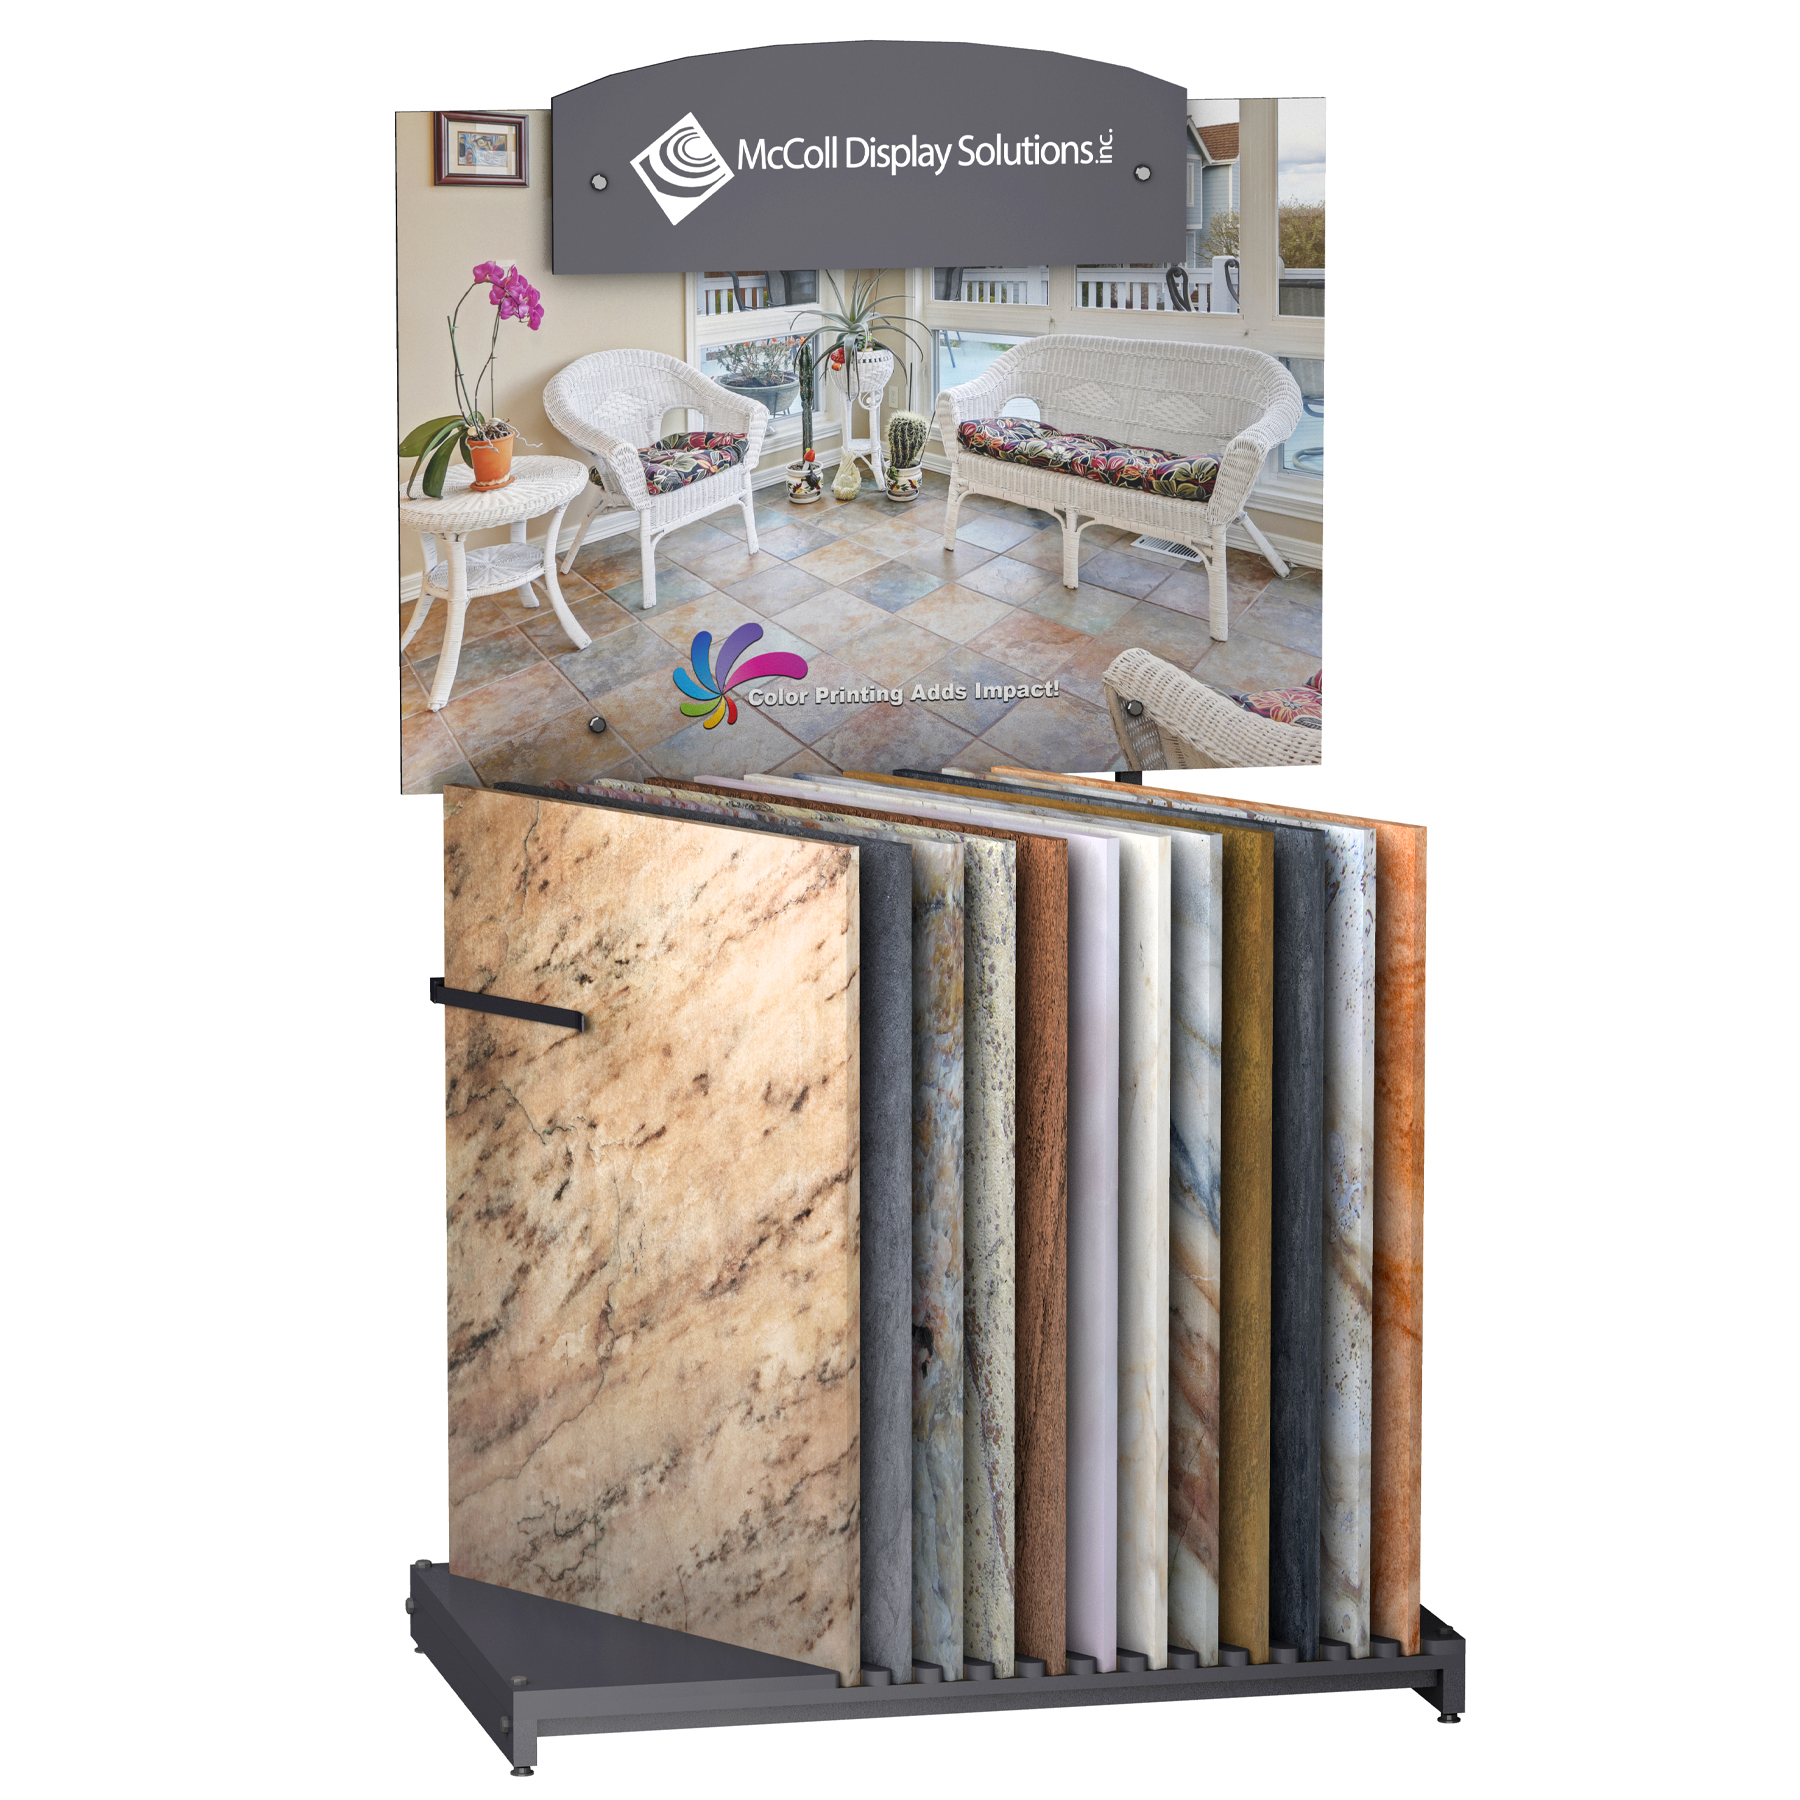 CD101 Slotted Floor Stand with Signage Displays Ceramic Tiles Marble Stone Quartz Travertine Flooring Samples Easy Viewing and Puts Your Products in Easy Reach